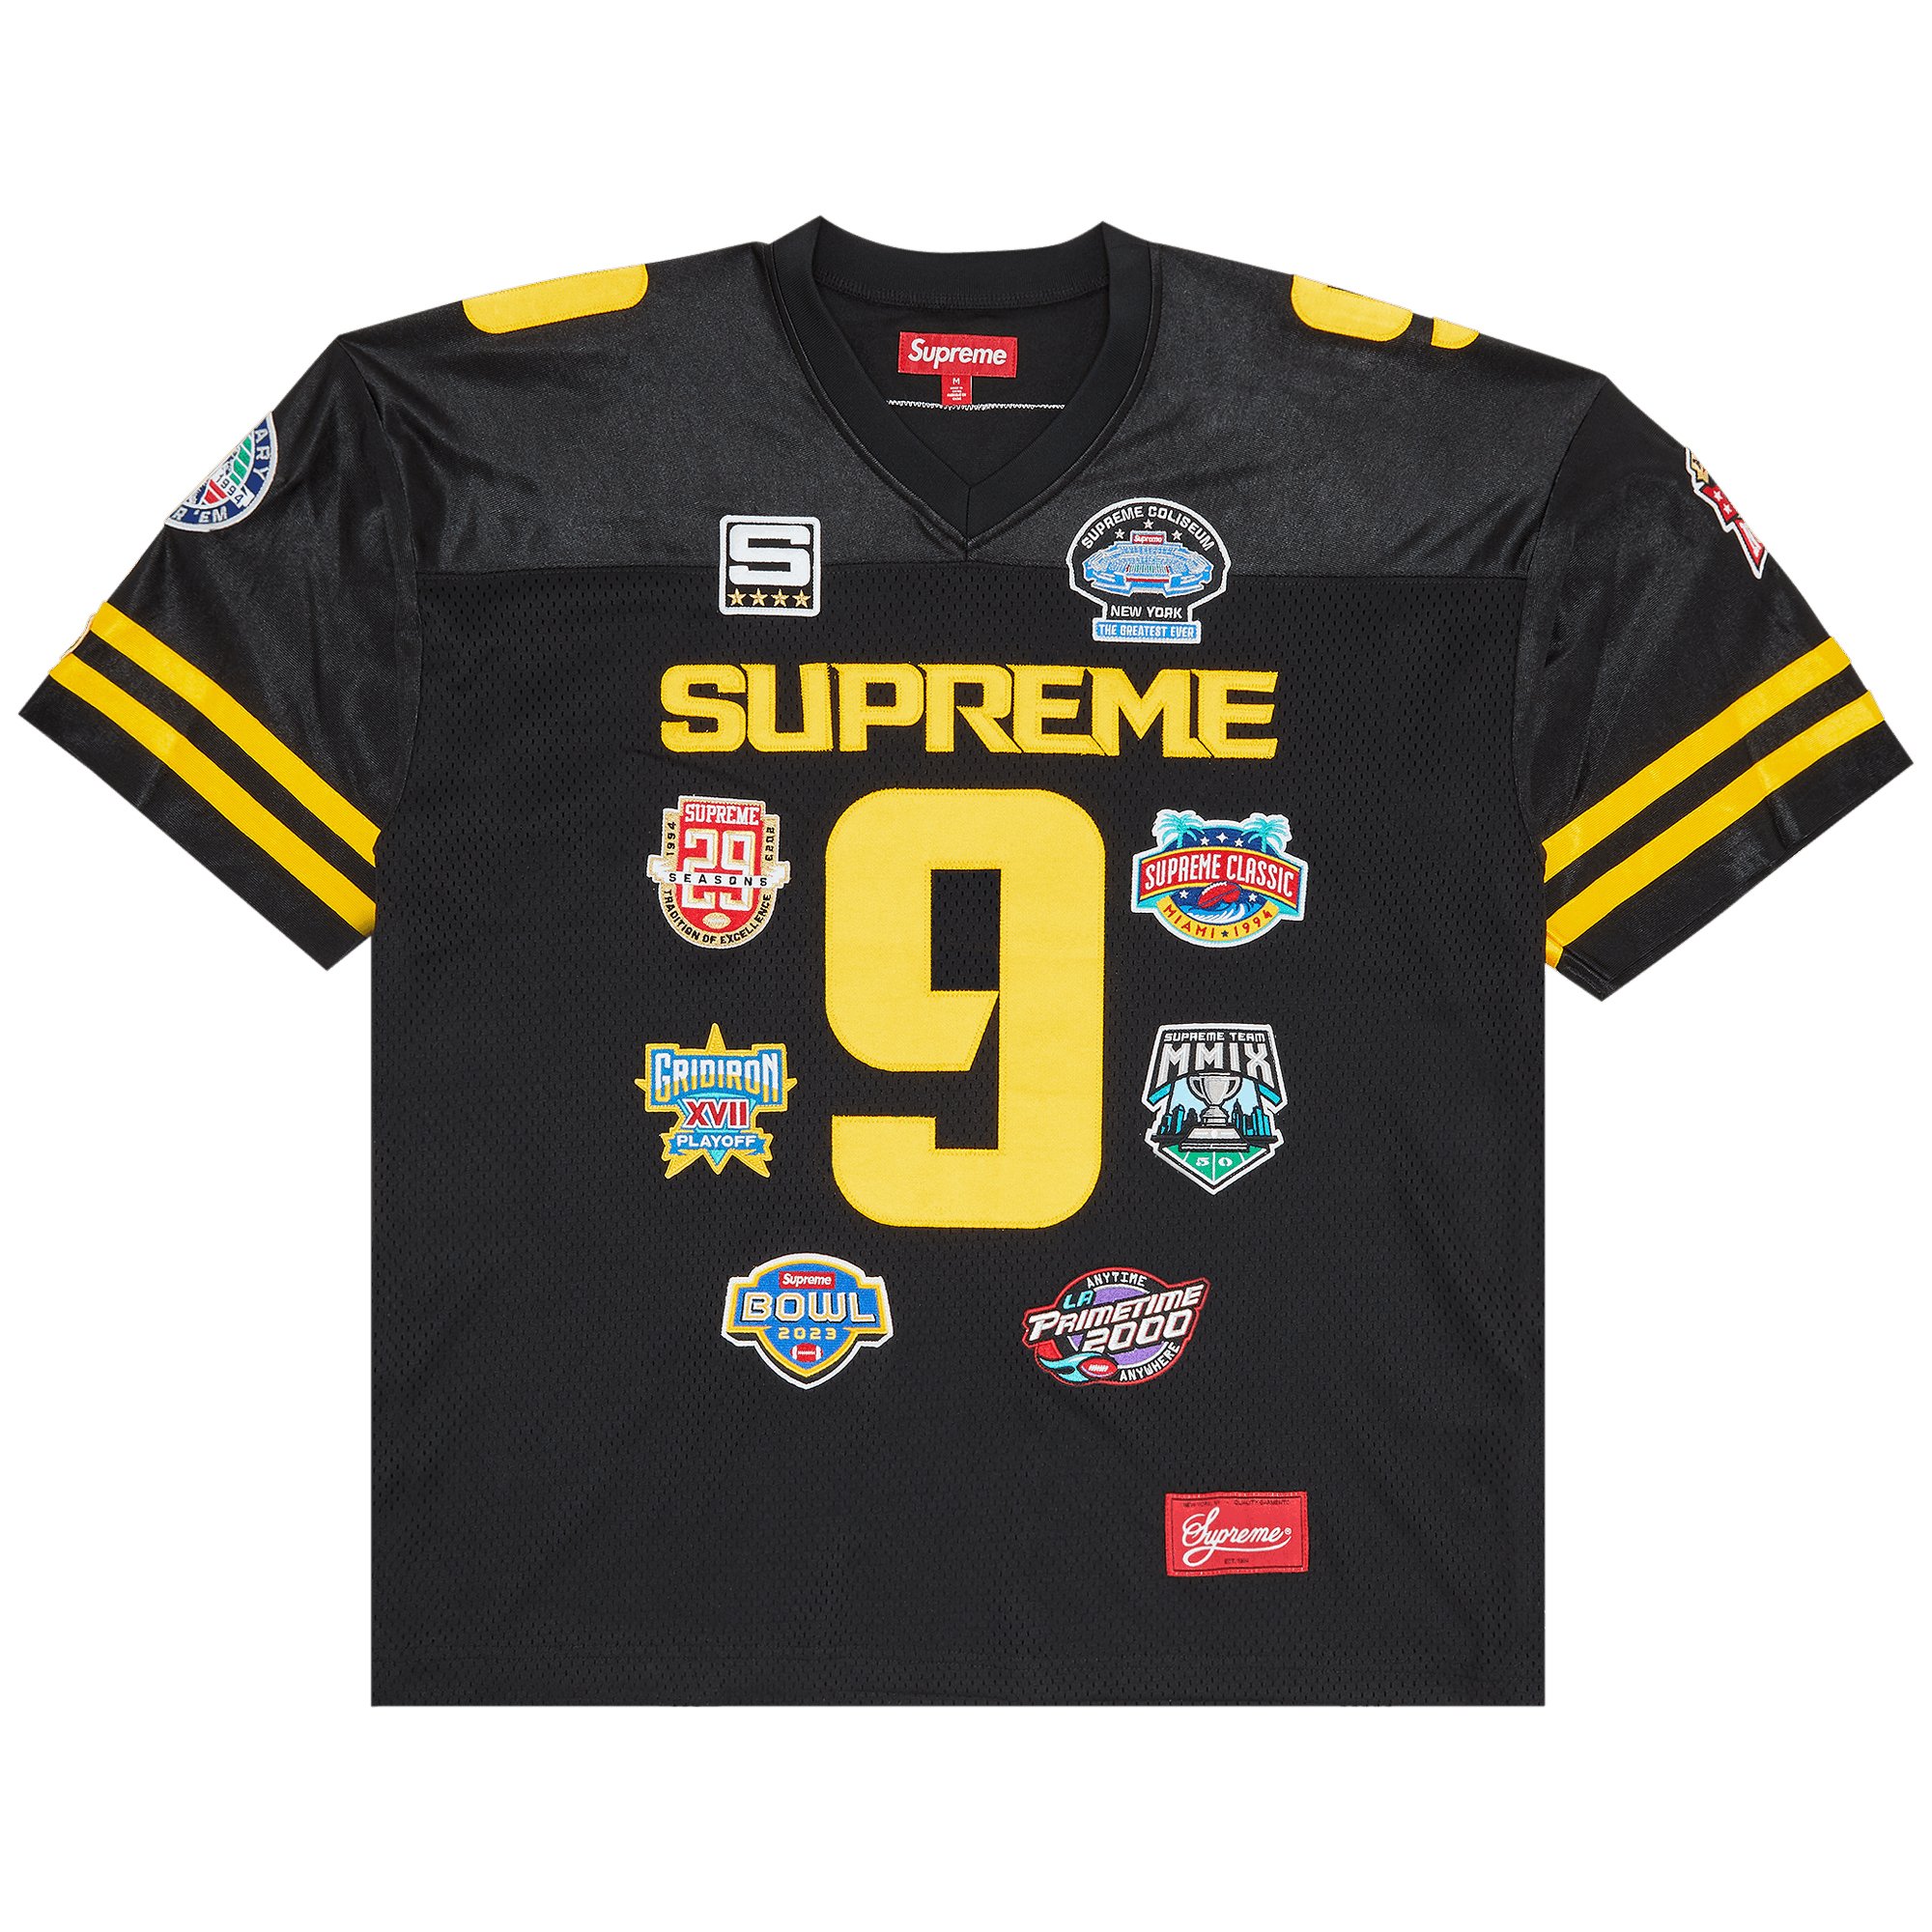 Supreme Championships Embroidered Football Jersey 'Black'